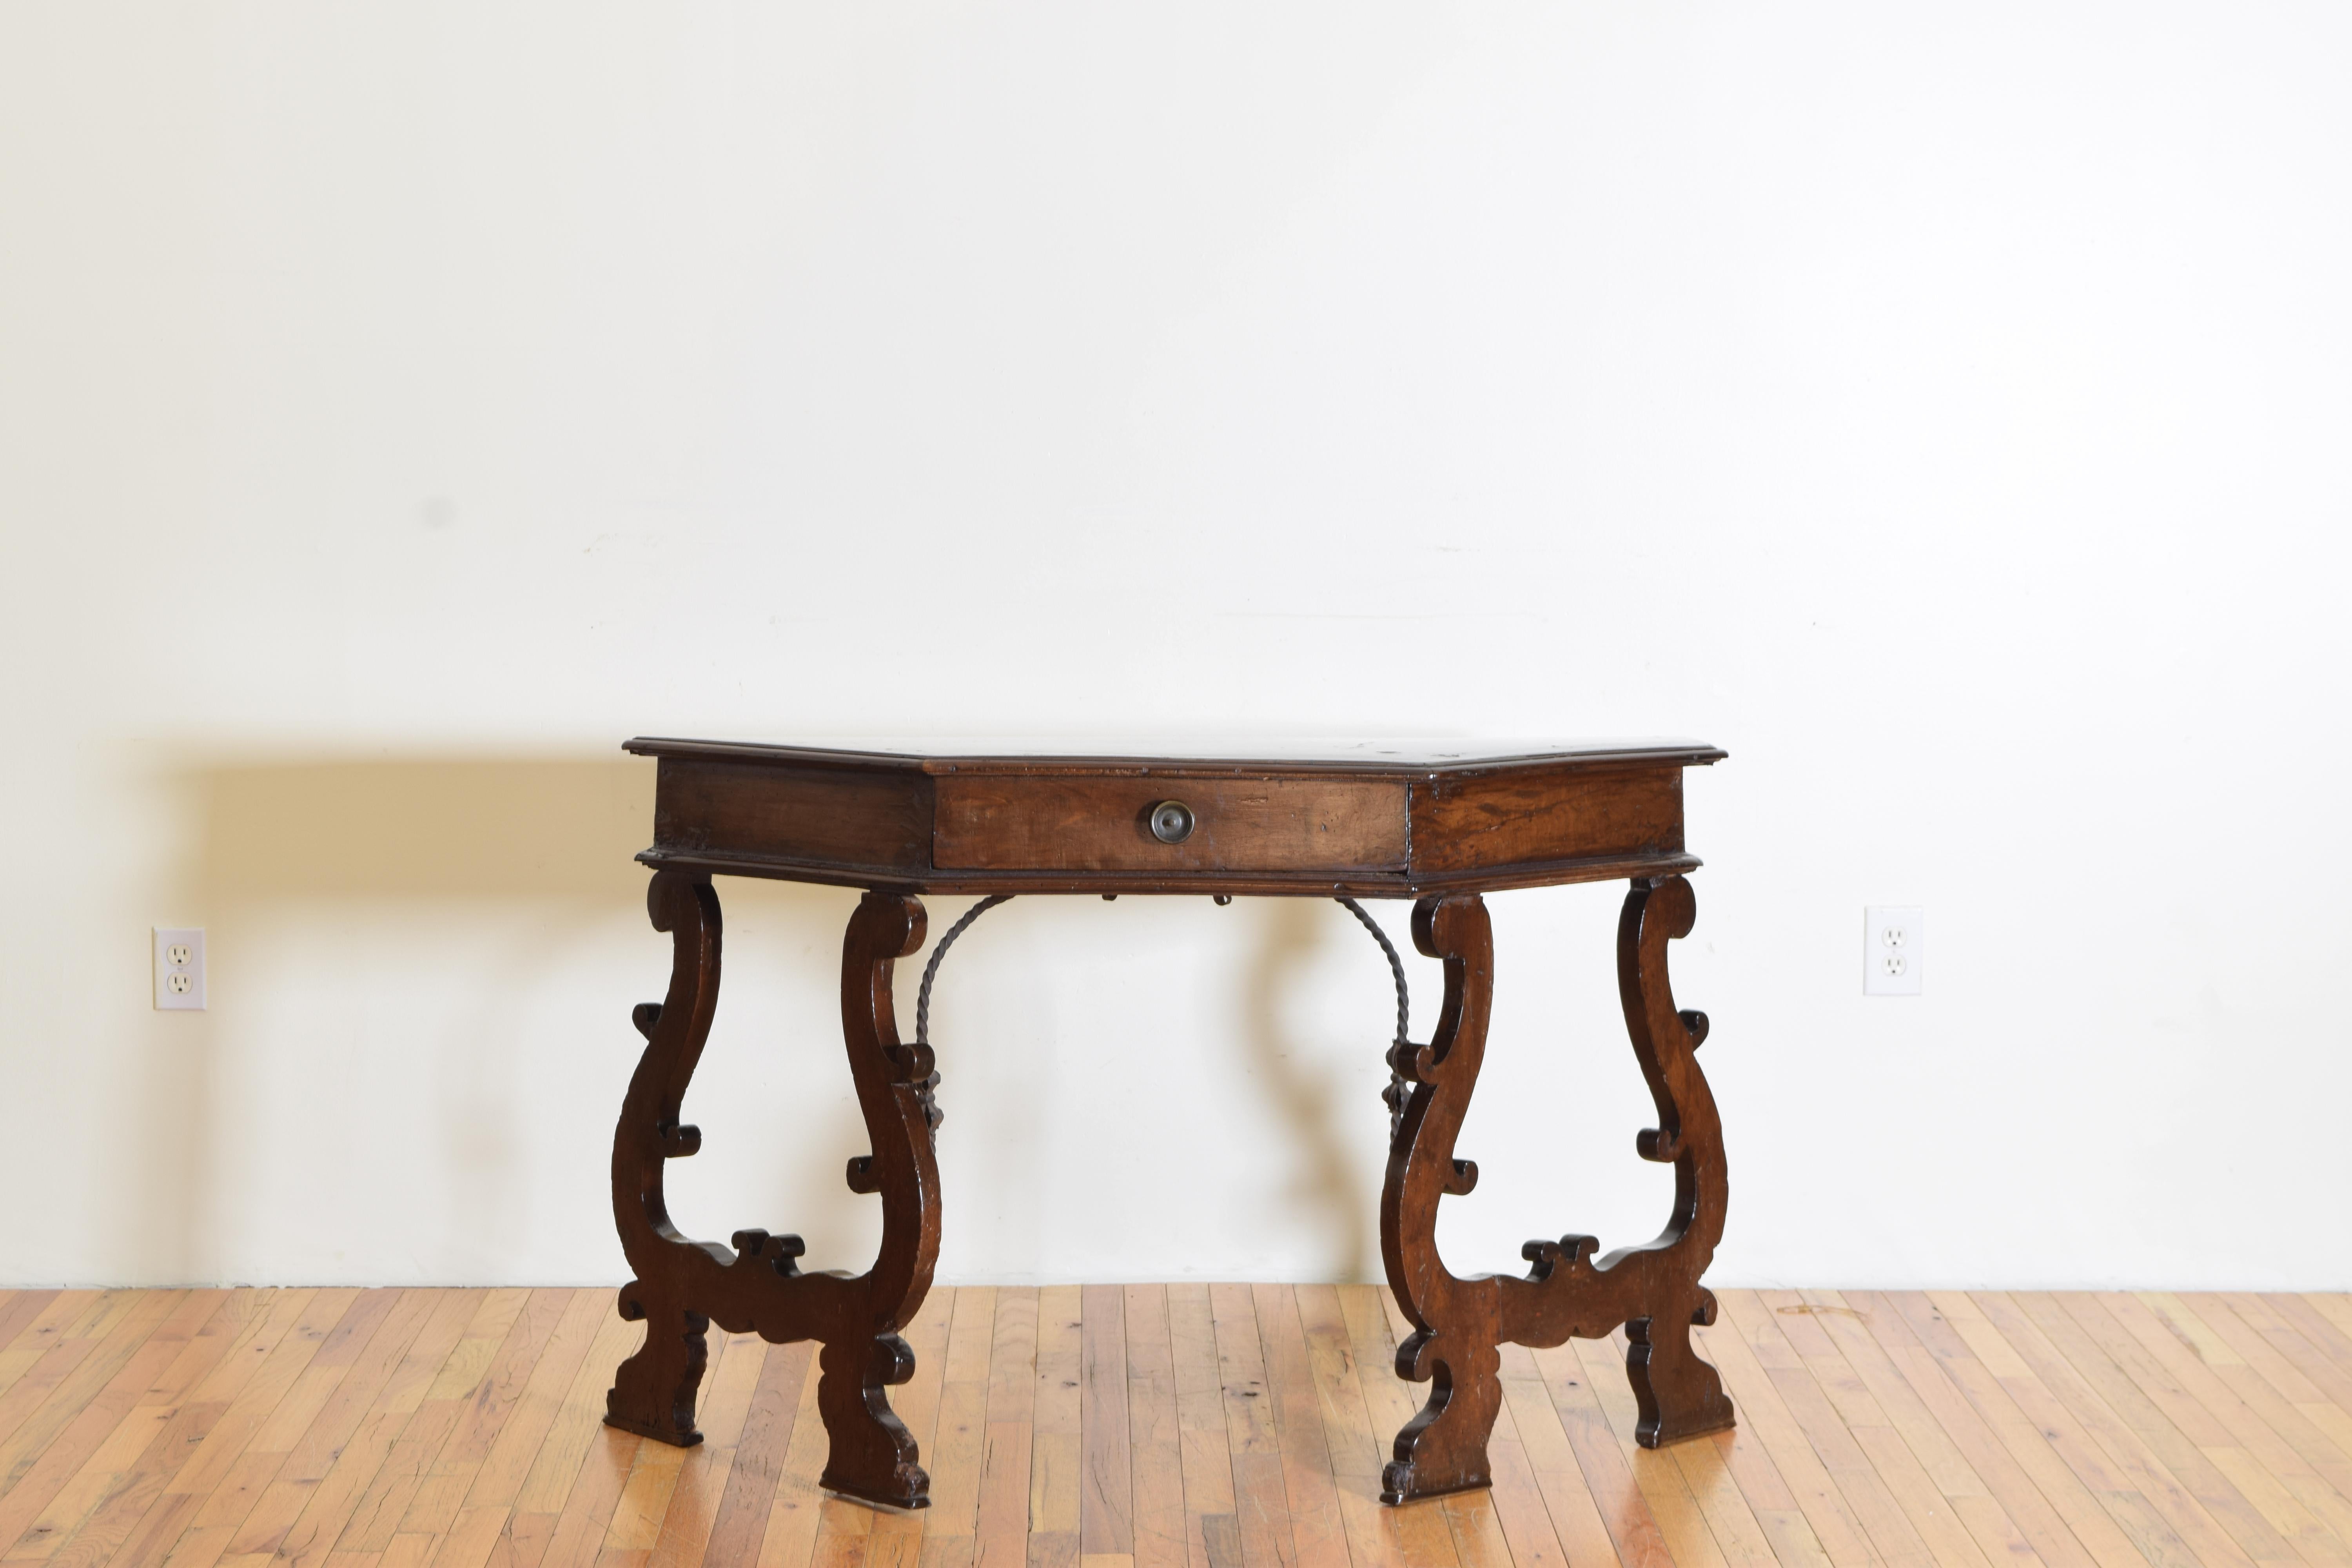 A canted-shaped walnut top with one drawer raised on trestle legs with an iron stretcher support between them with a beautiful aged walnut patina.